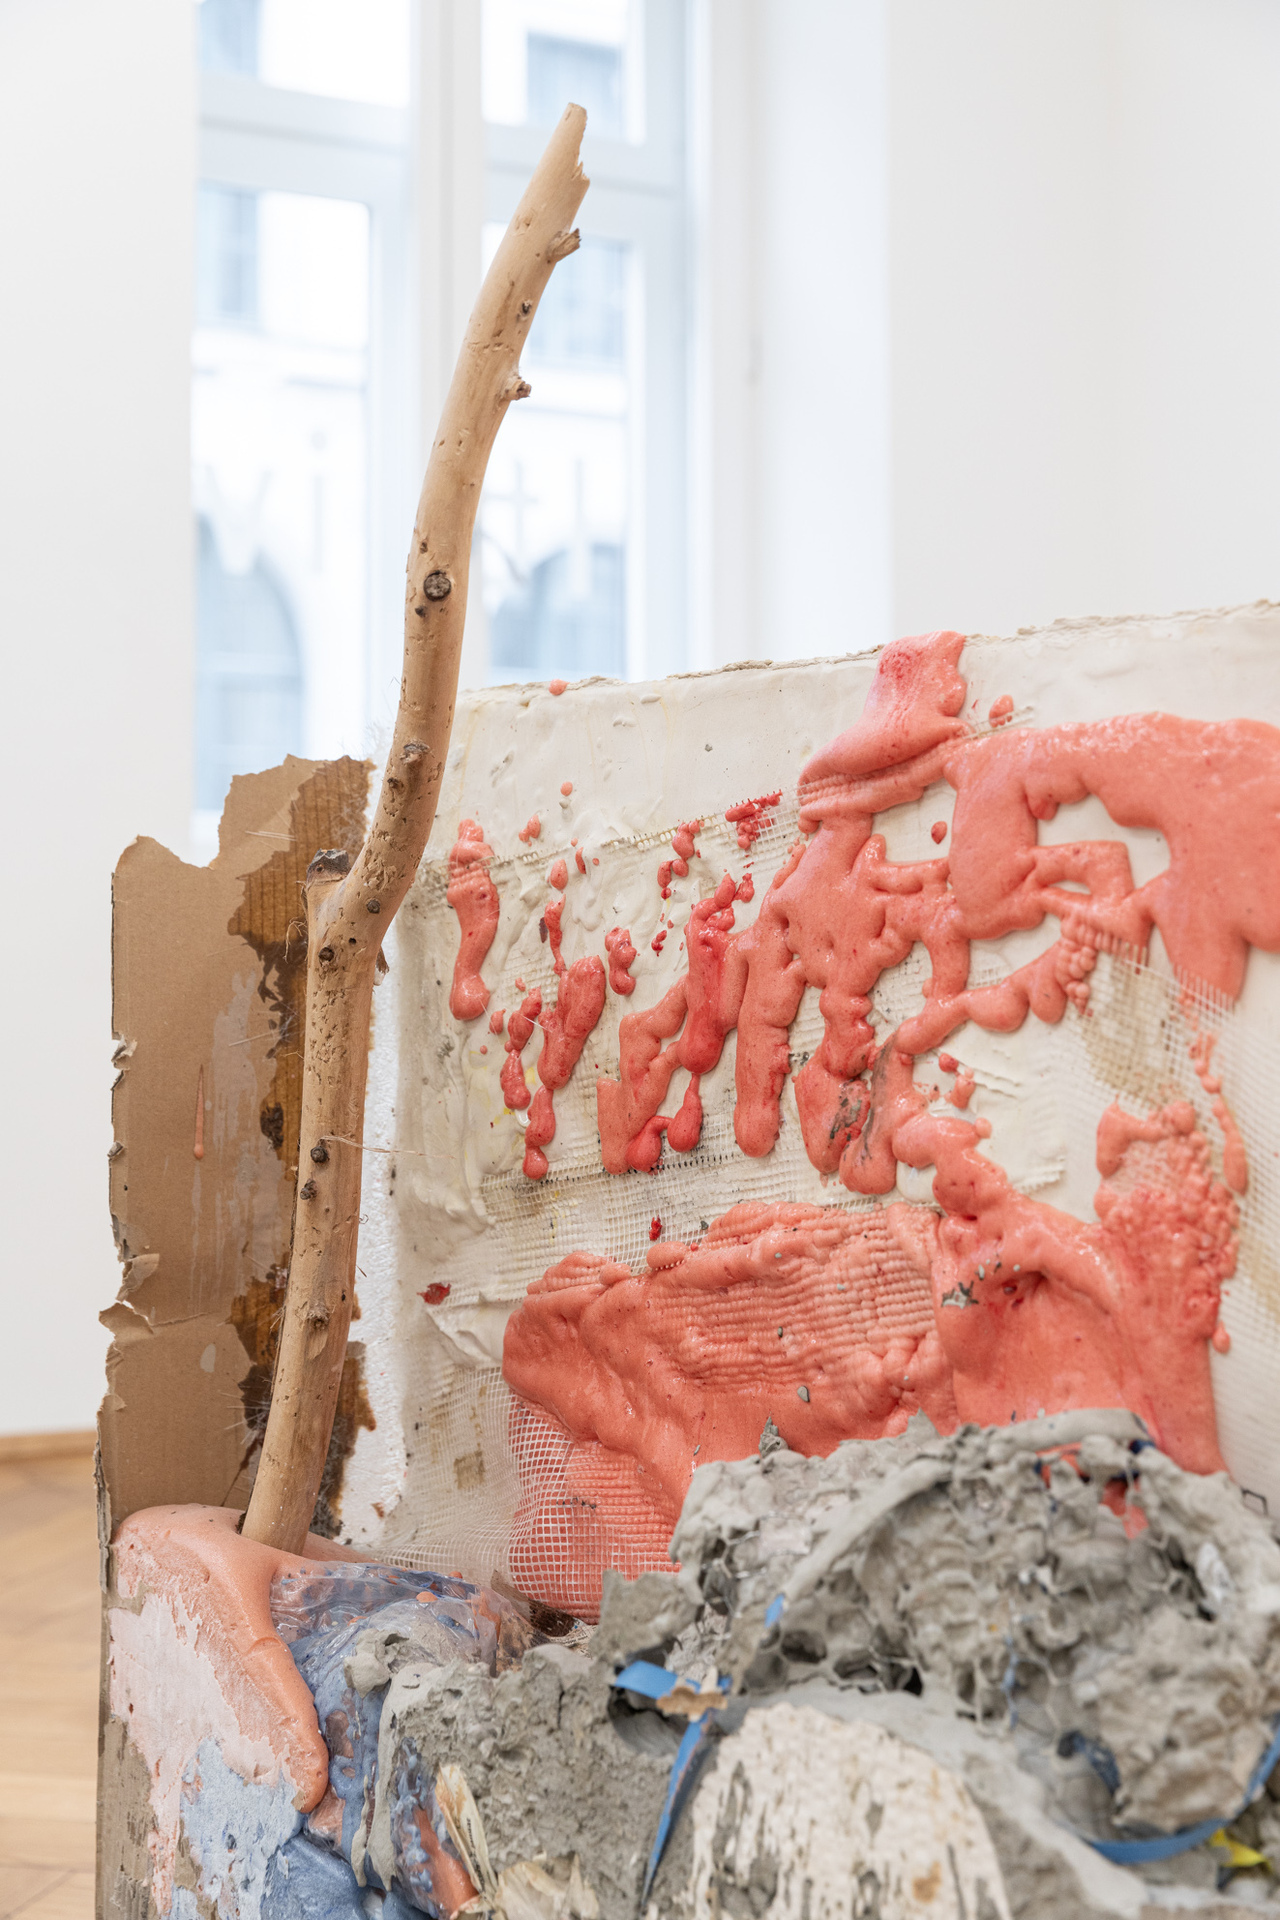 Patrick Ostrowsky, "funky, ich mag's (70-72)", 2020, branch, concrete, polyurethane foam, pigments, plaster, wire, cardboard, fiberglass, spray paint, strapping tape, scree, 71 x 65 x 18,5 cm